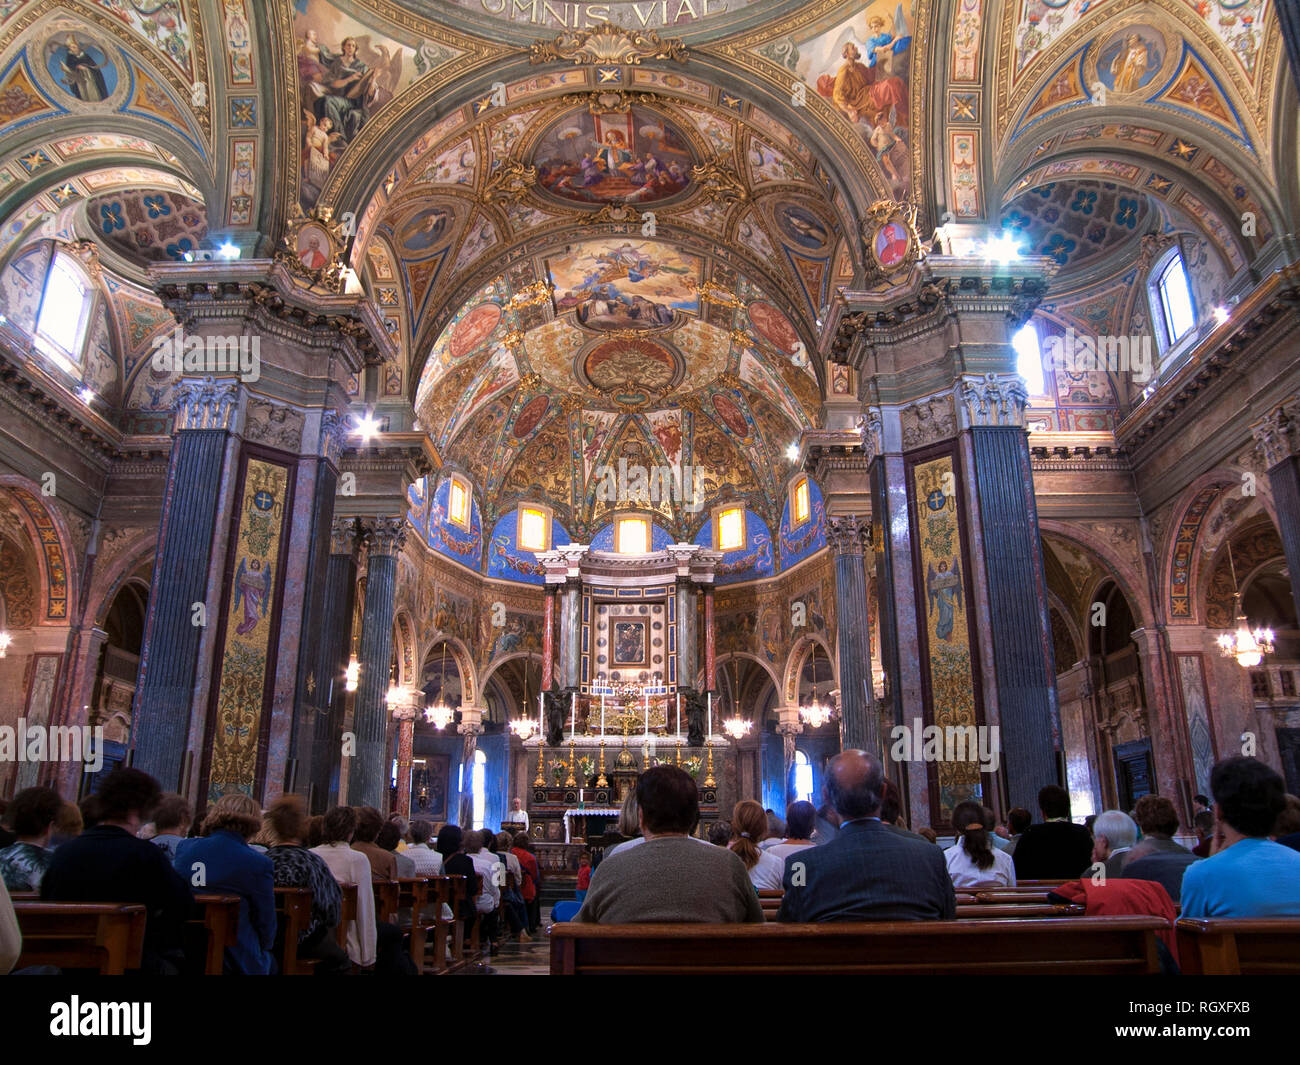 Inside the Shrine of the Virgin of the Rosary of Pompei, Naples, Italy. Stock Photo